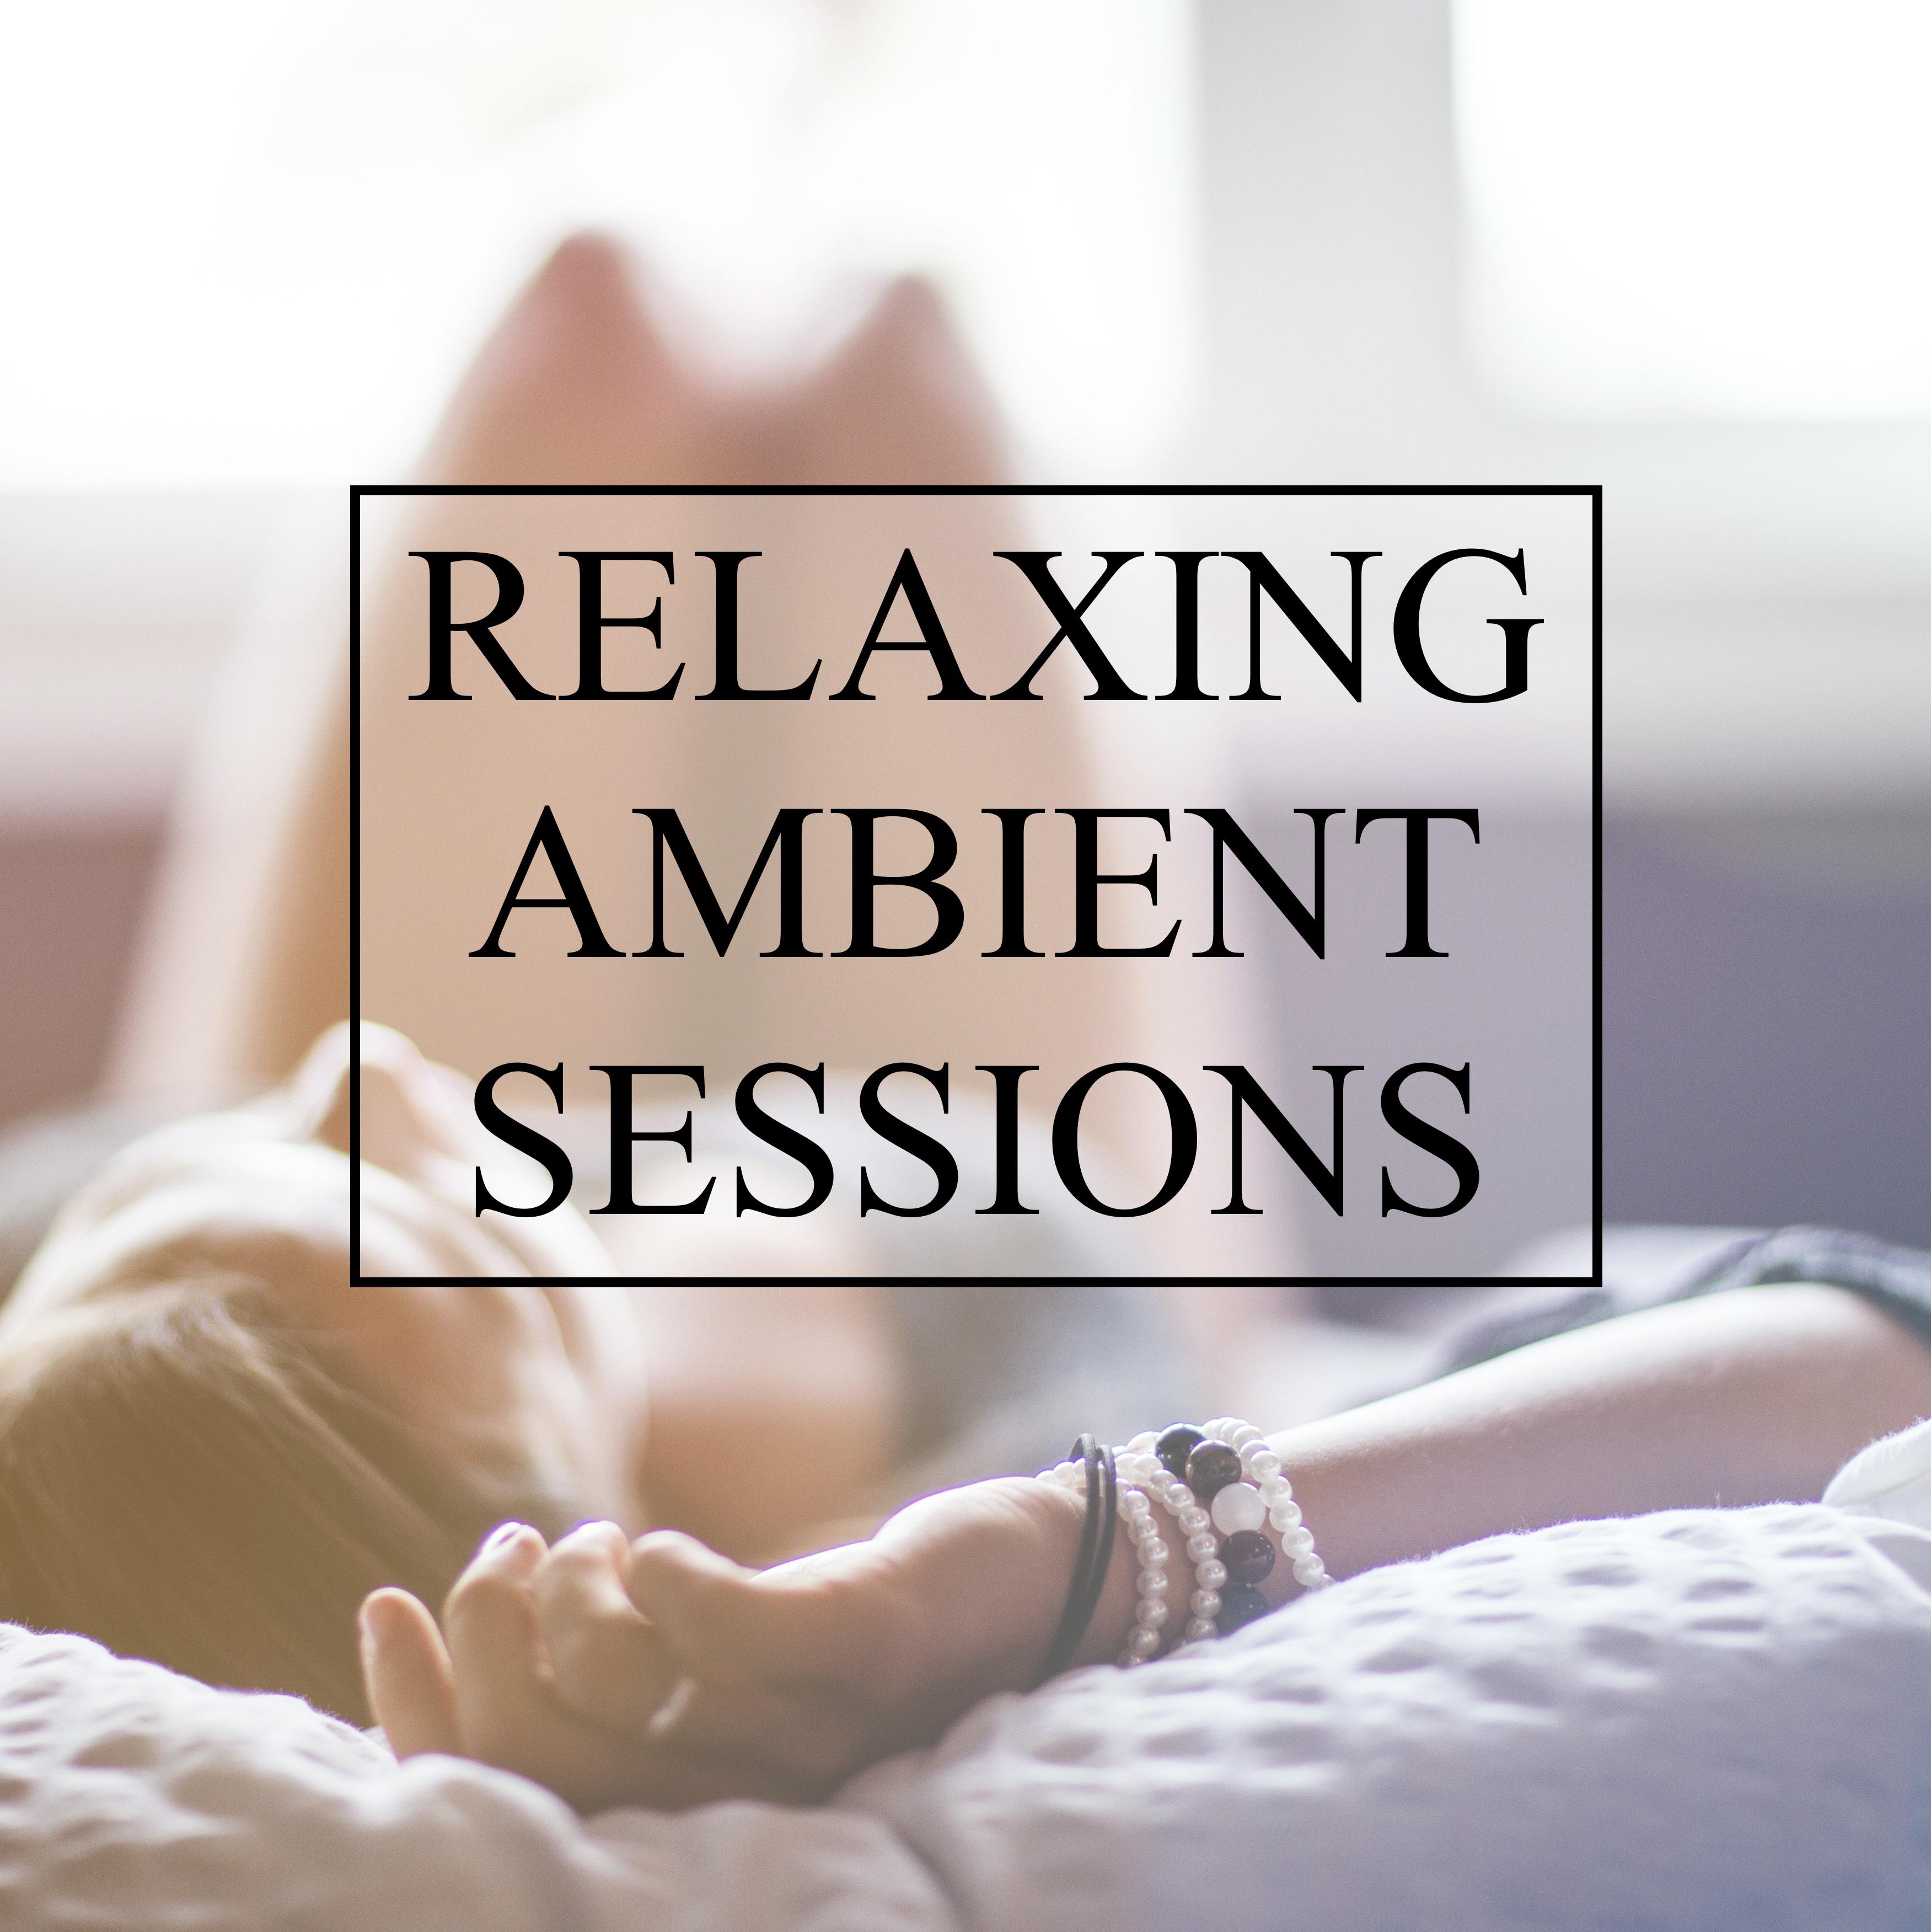 Relaxing Ambient Sessions - 20 Chillout & Lounge Tracks to Relax After a Long Day; Ultimate Chill Ambience, Total Stress & Anxiety Relief, Soothing Spa & Meditation Sessions and Absolute Study Focus